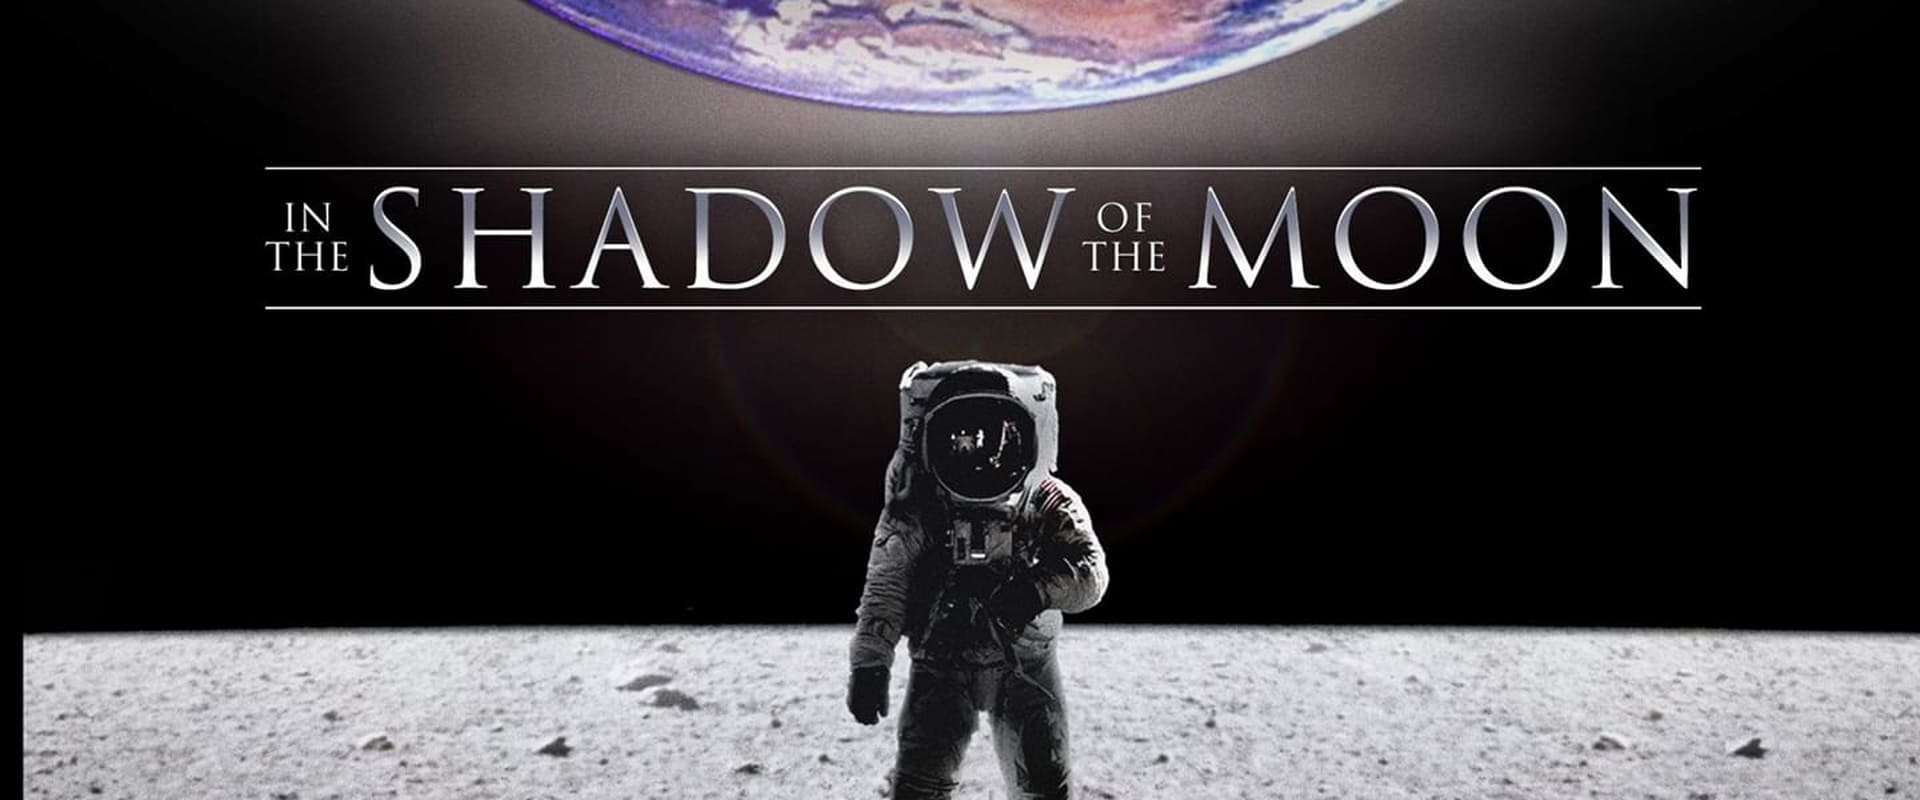 In the Shadow of the Moon